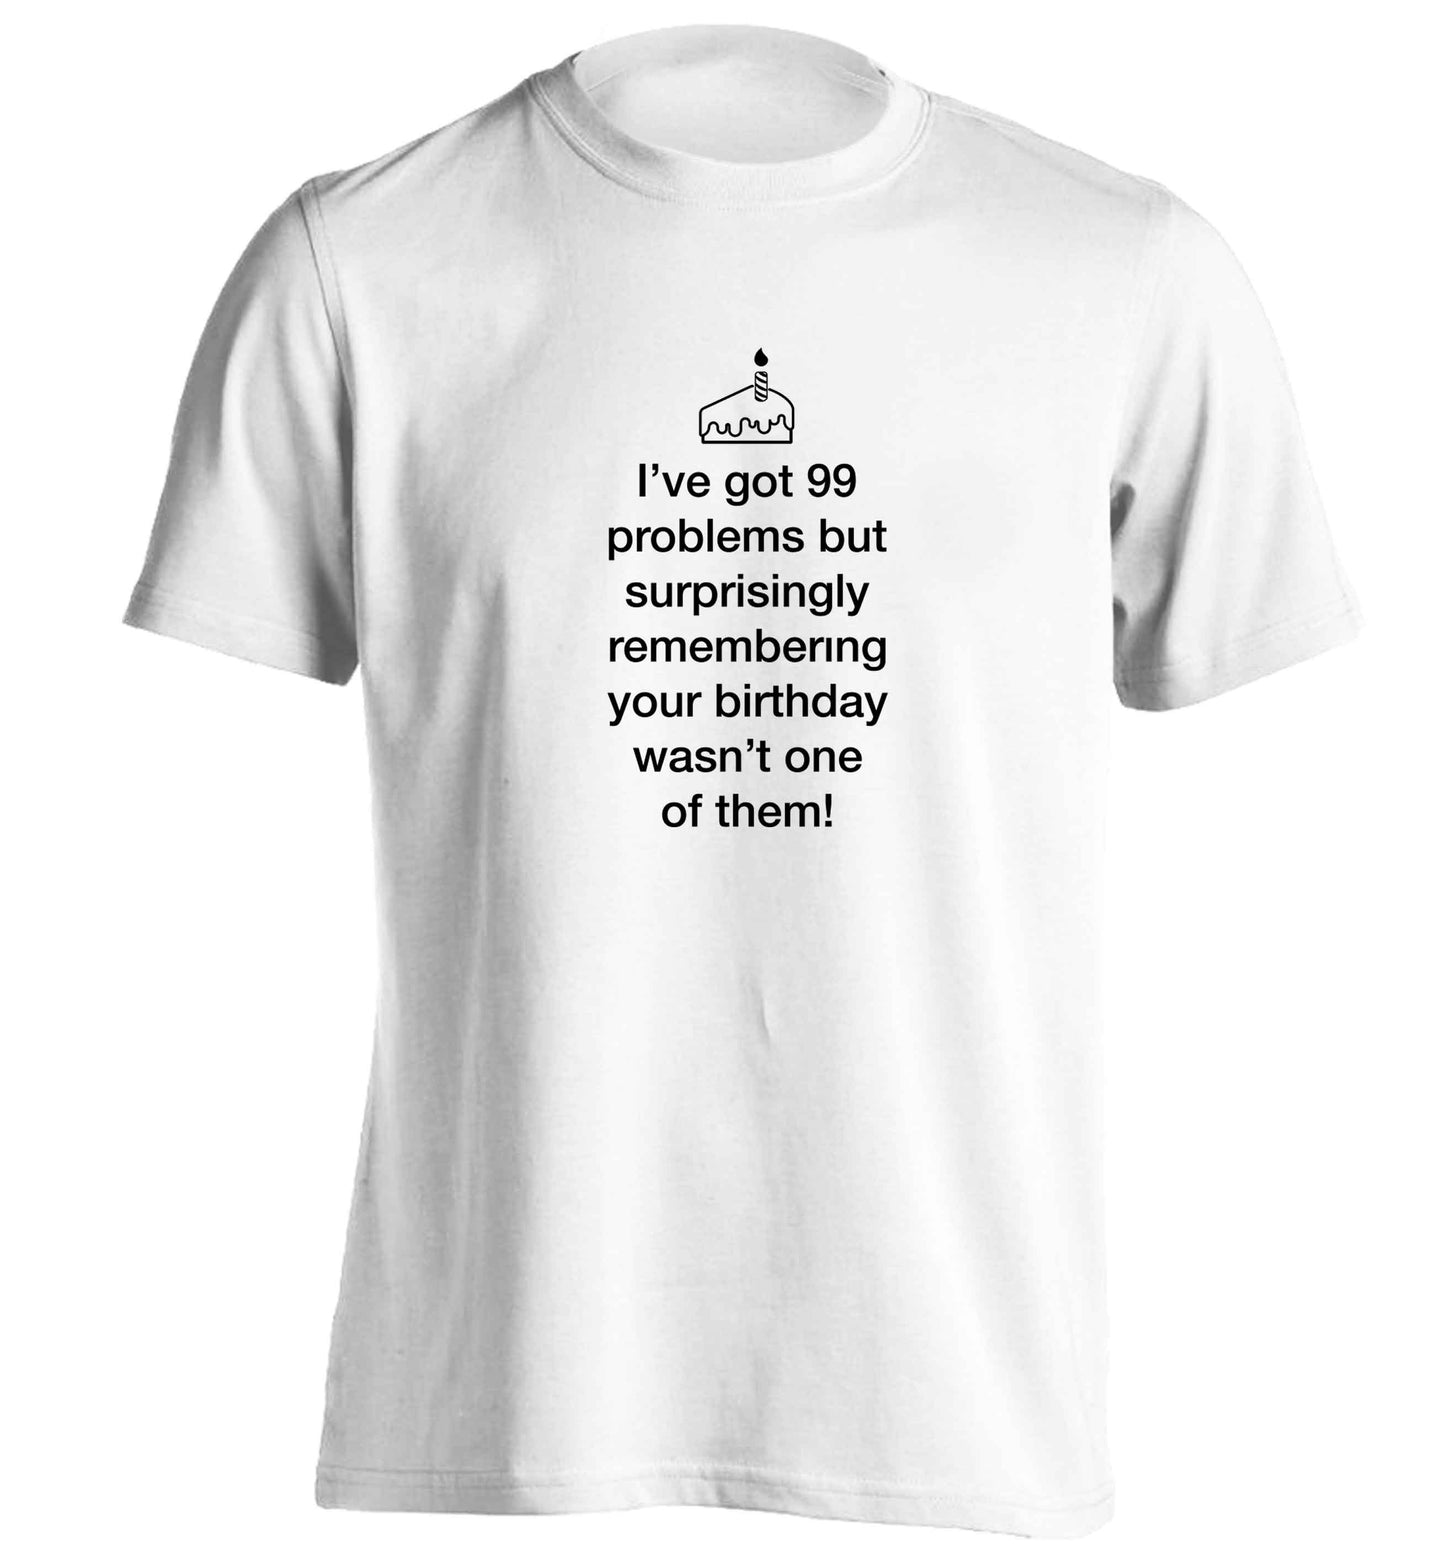 I've got 99 problems but surprisingly remembering your birthday wasn't one of them! adults unisex white Tshirt 2XL